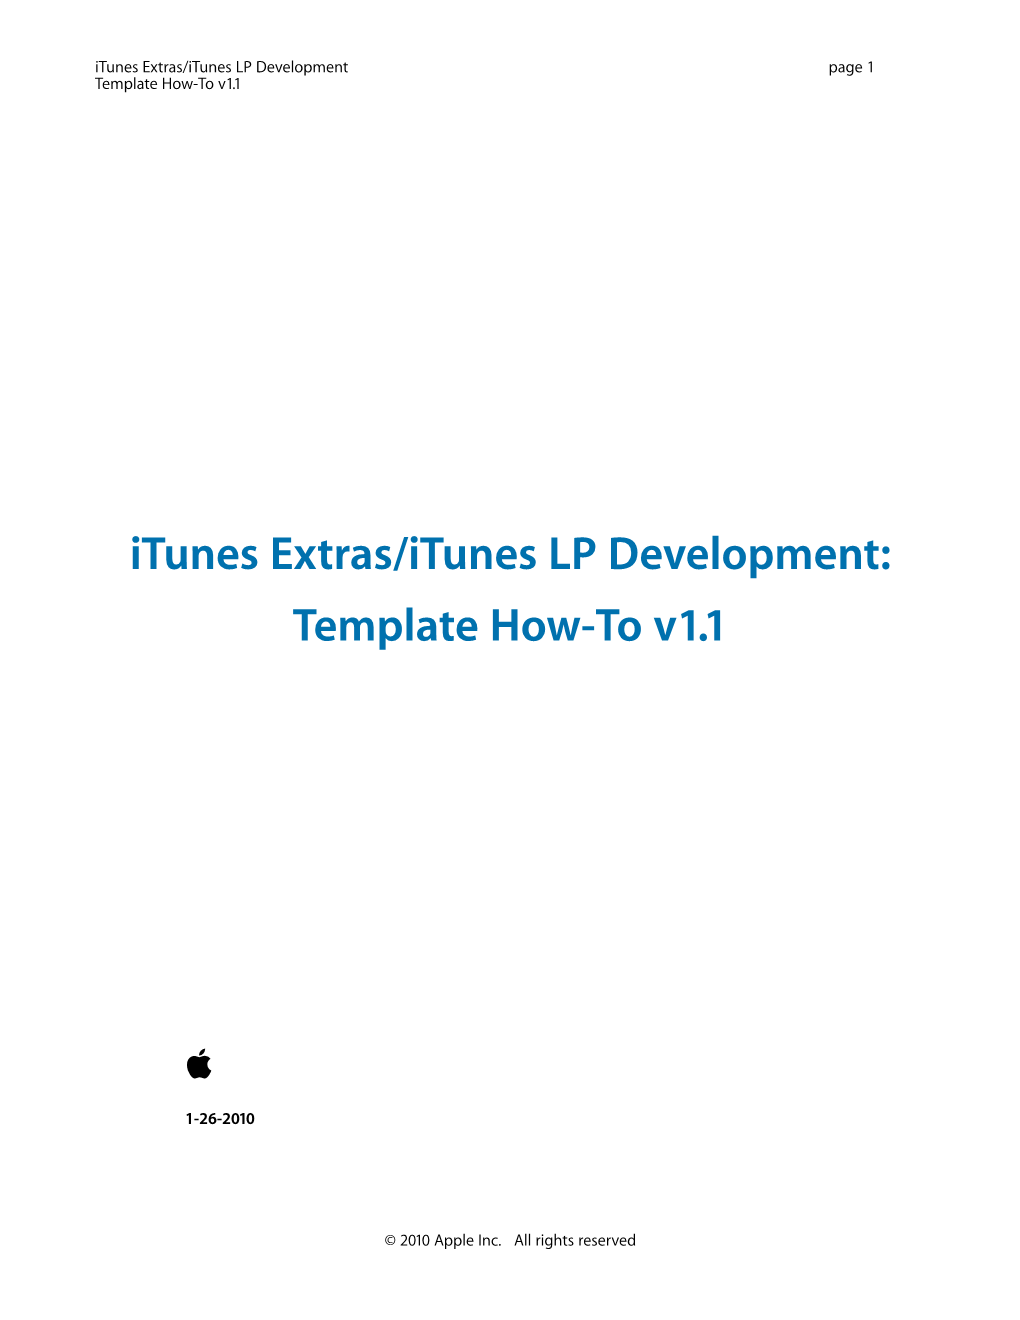 Template How-To V1.1